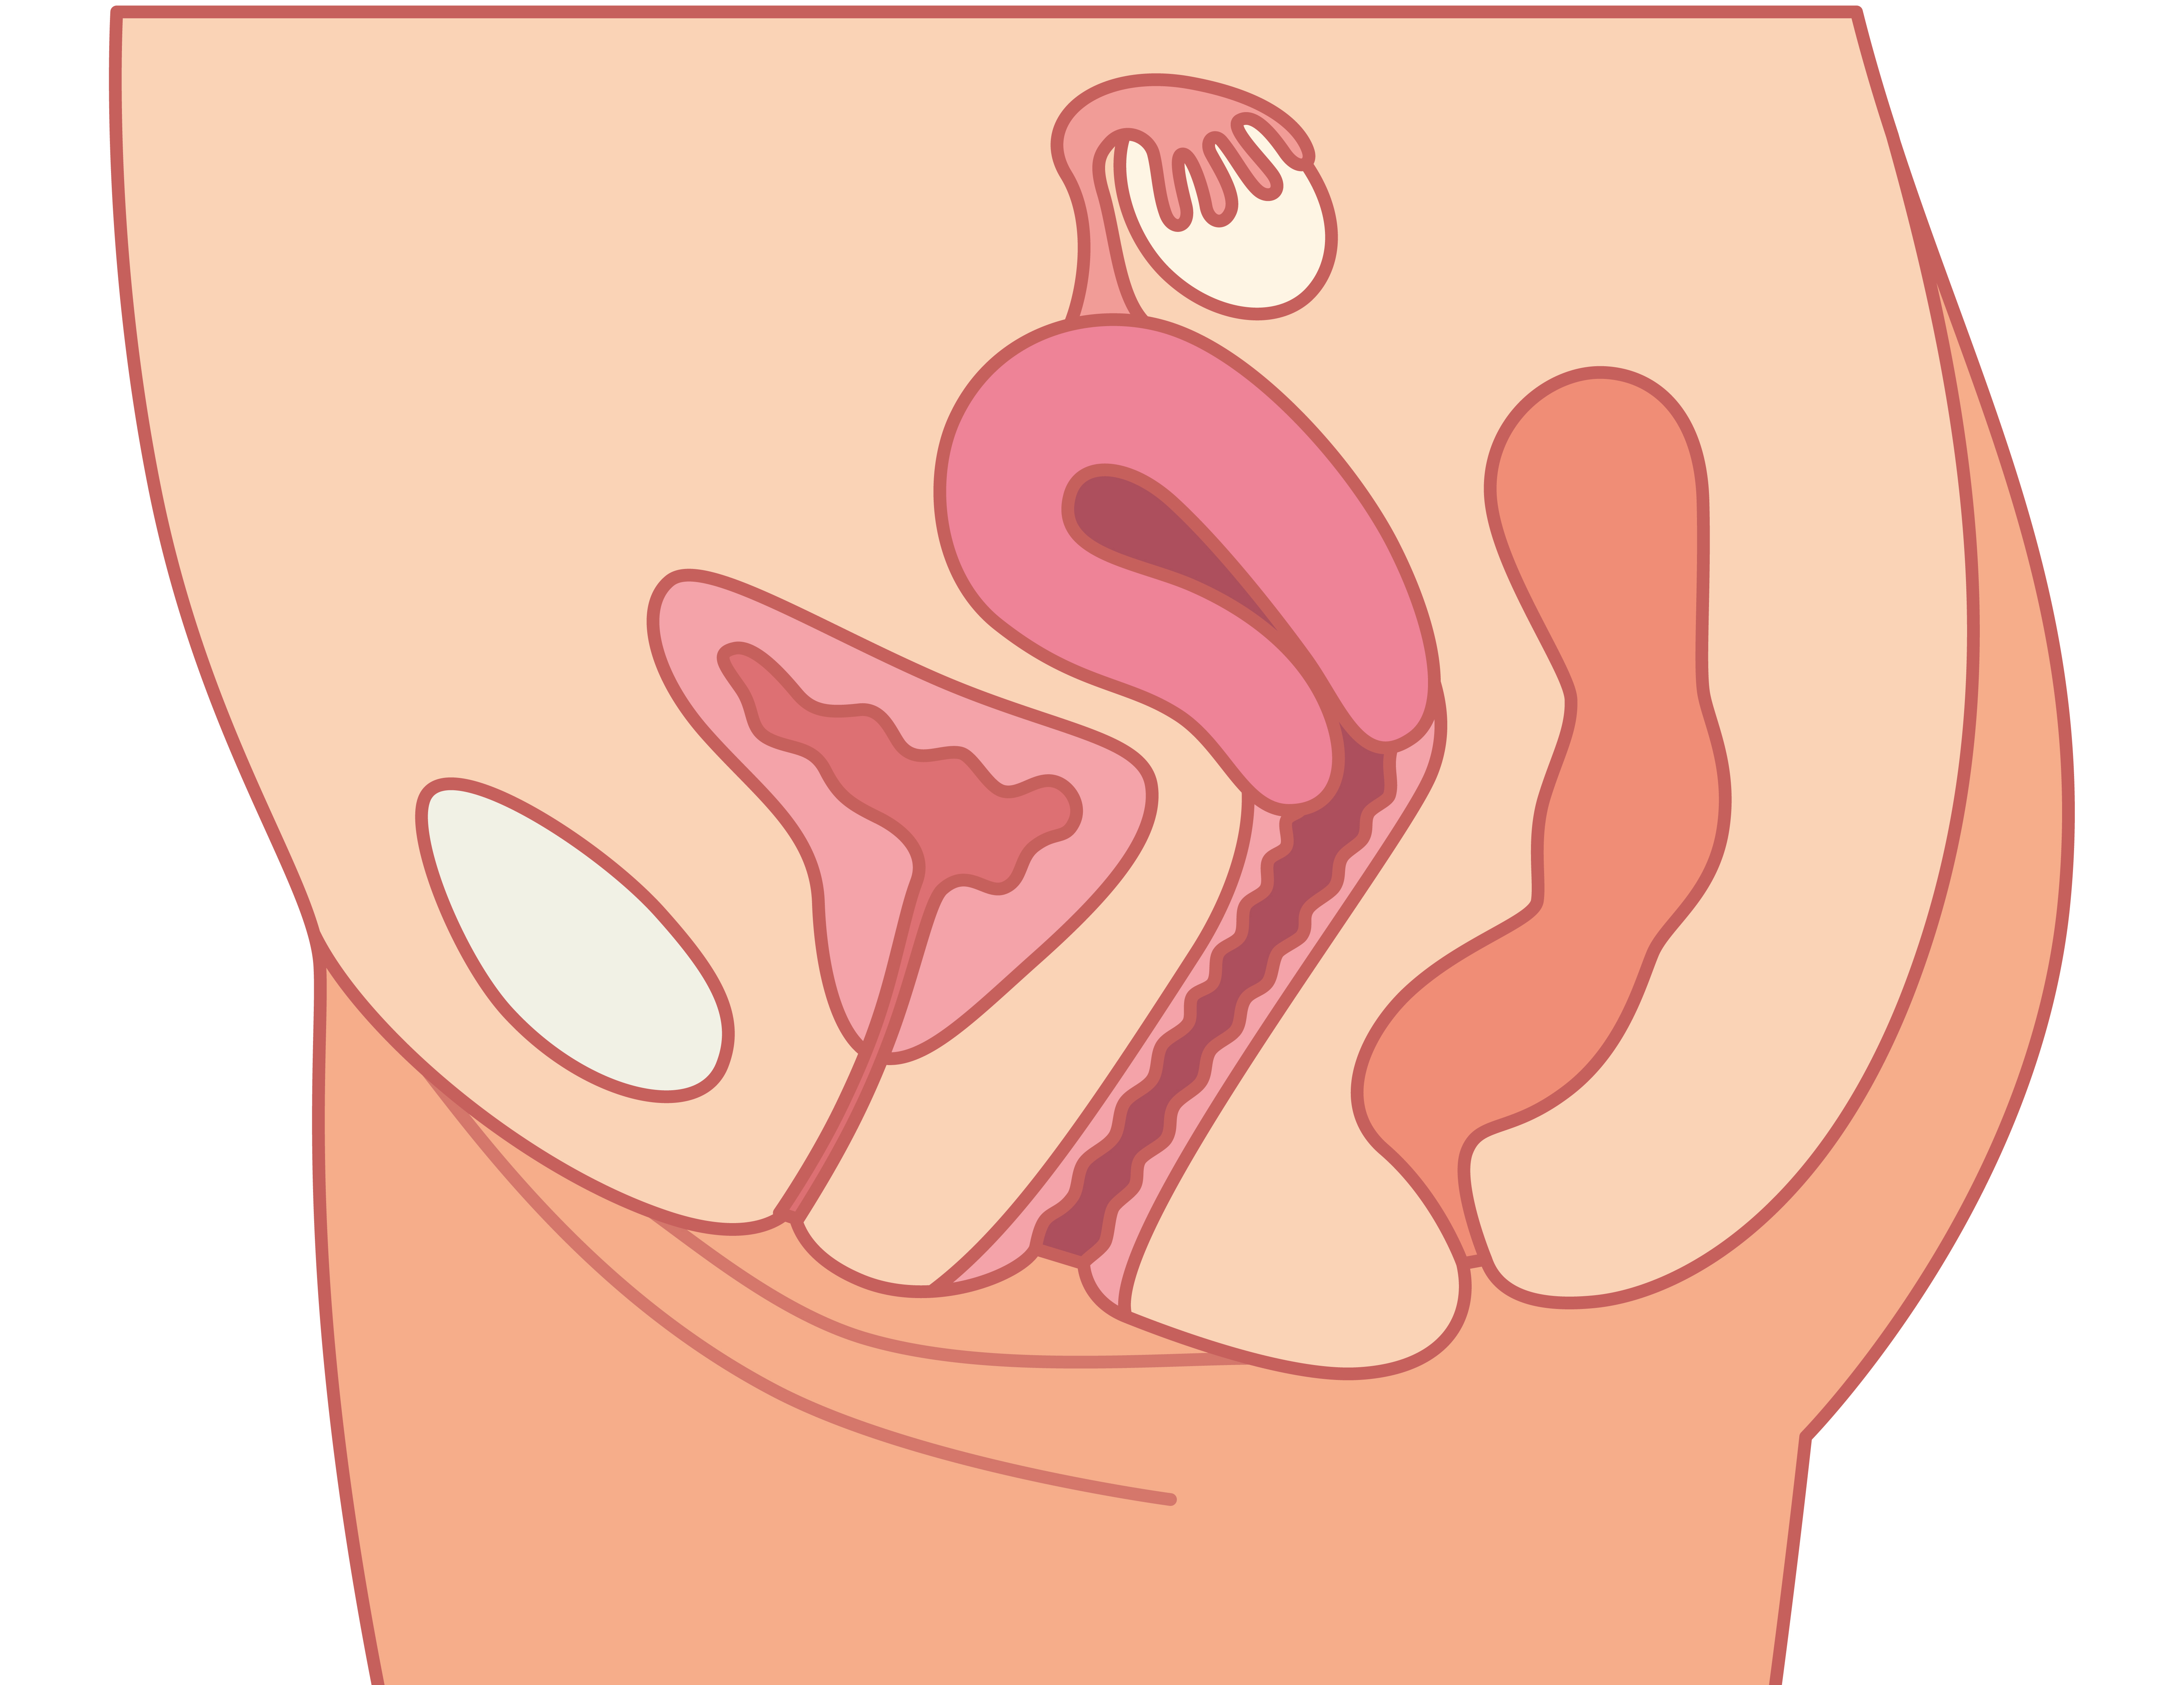 8 questions with answers in UTERINE PROLAPSE